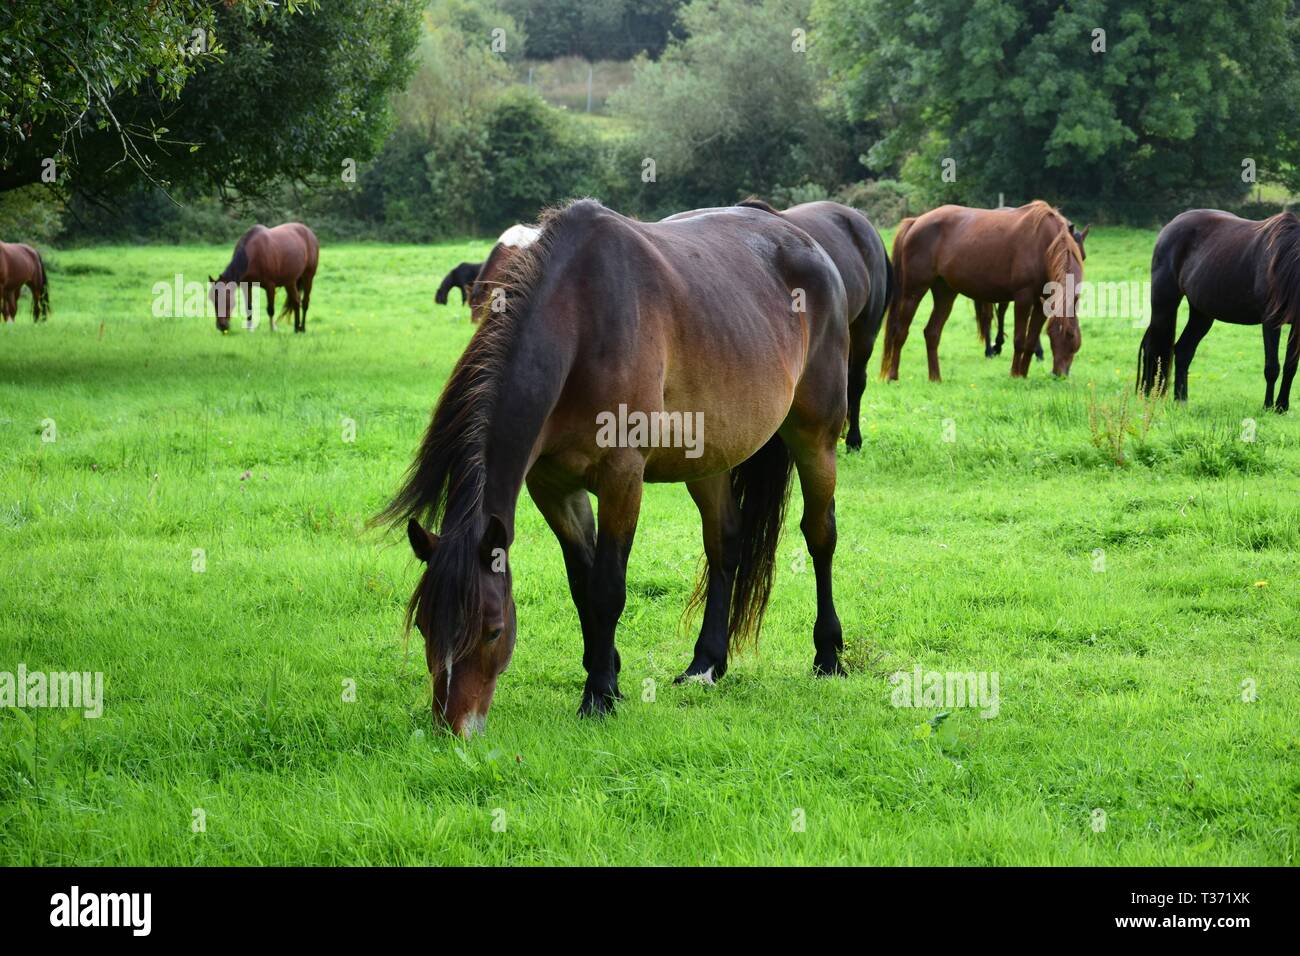 A herd of grazing horses in Ireland, with one bay horse in front. Landscape in the background. Stock Photo